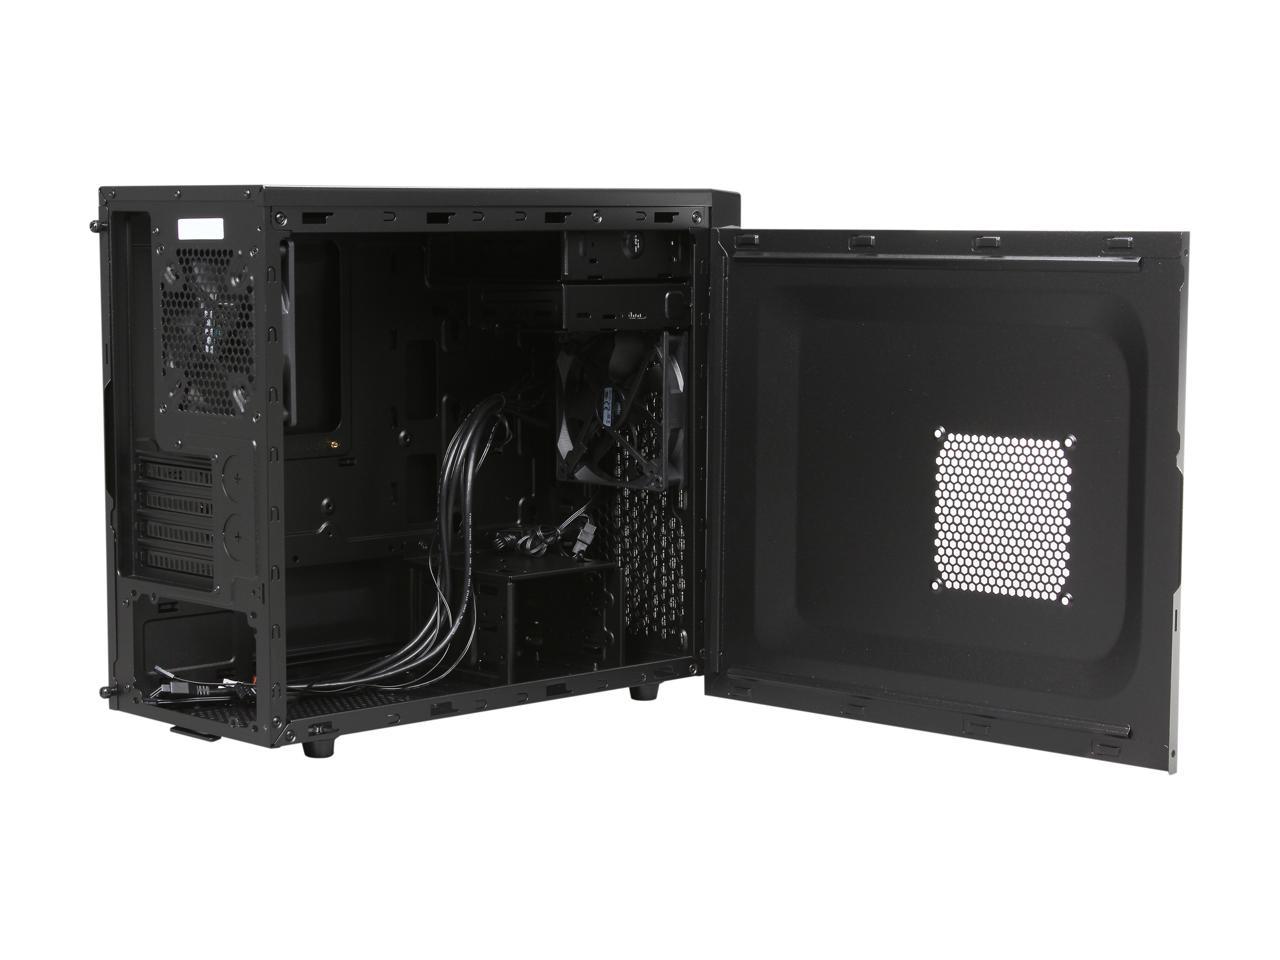 cooler-master-n200-micro-atx-mini-tower-computer-case-with-front